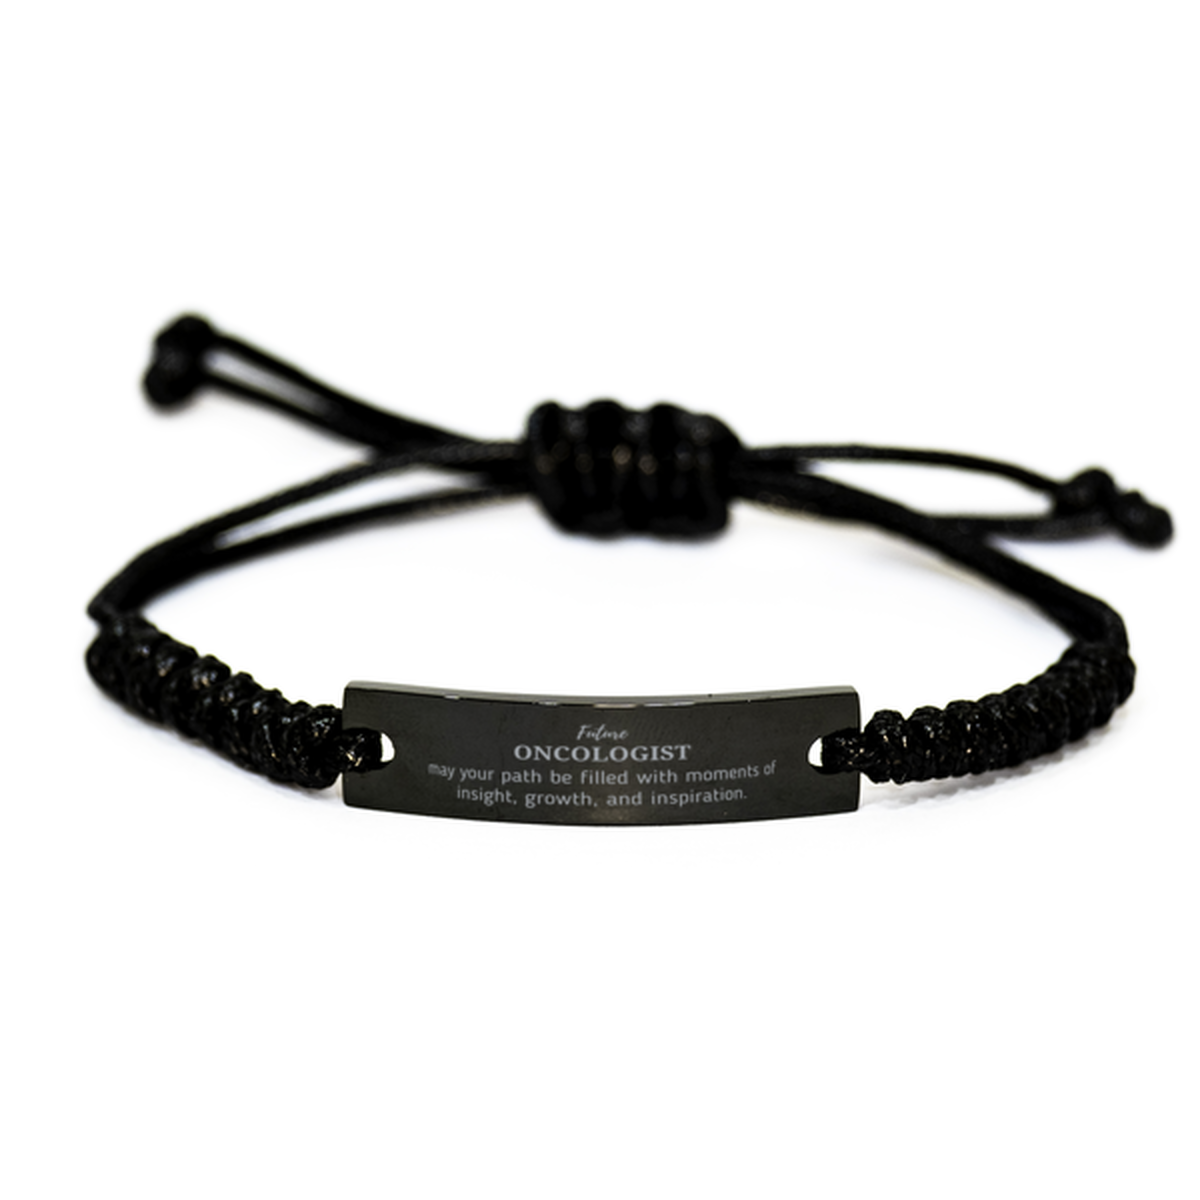 Future Oncologist Gifts, May your path be filled with moments of insight, Graduation Gifts for New Oncologist, Christmas Unique Black Rope Bracelet For Men, Women, Friends